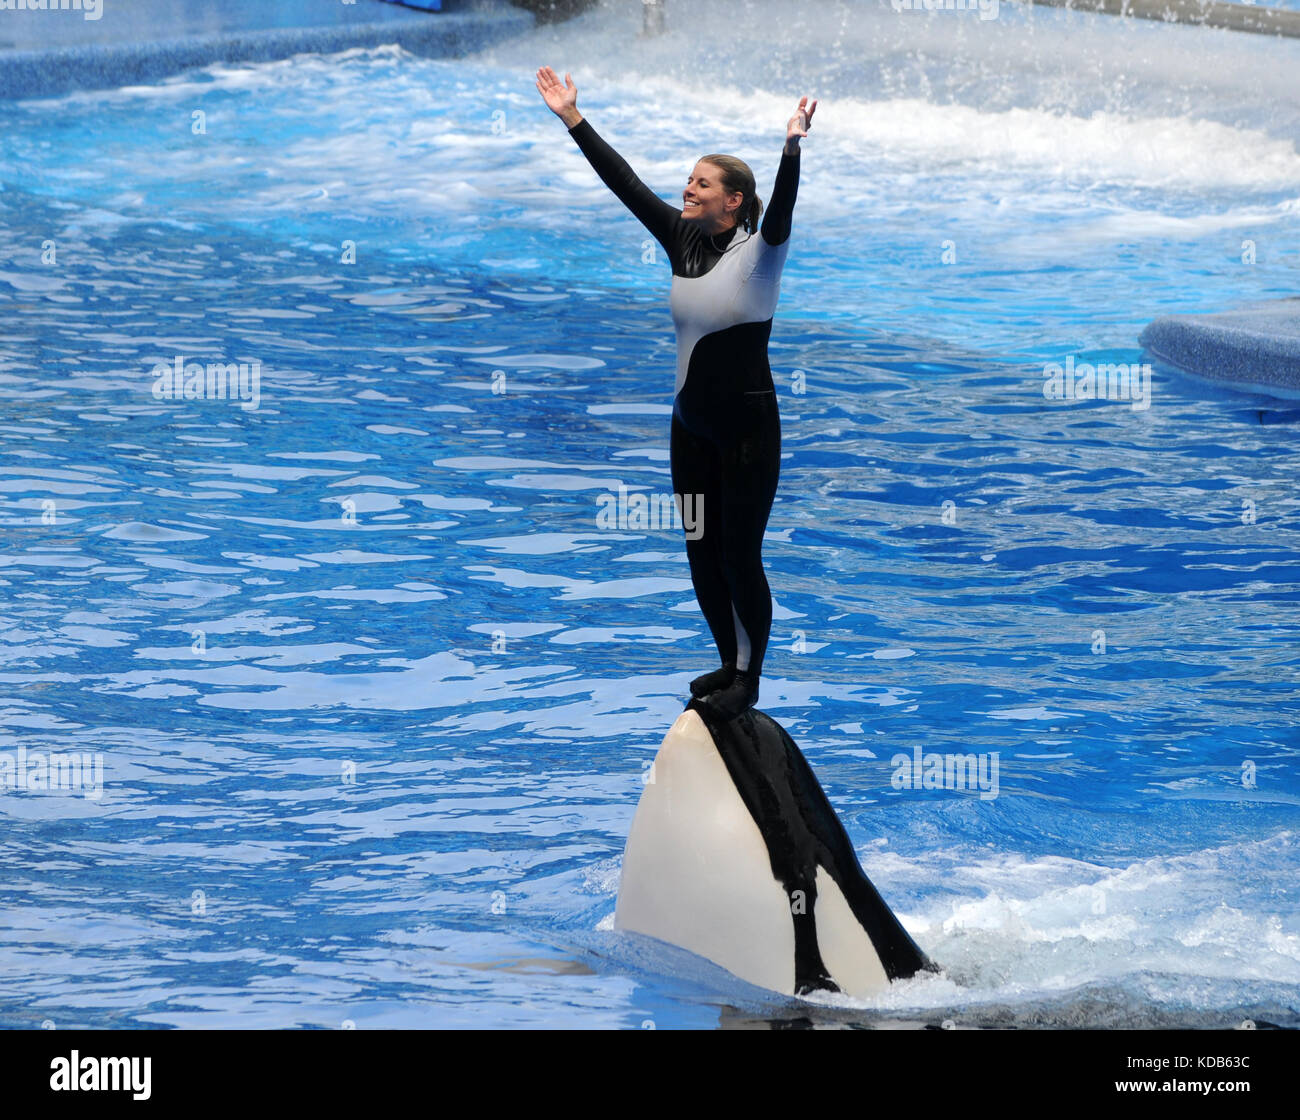 ORLANDO, FEBRUARY 25, 2009: SeaWorld trainer dies in killer whale attack in Orlando. Pictured: Killer whale trainer greets visitors during show Stock Photo